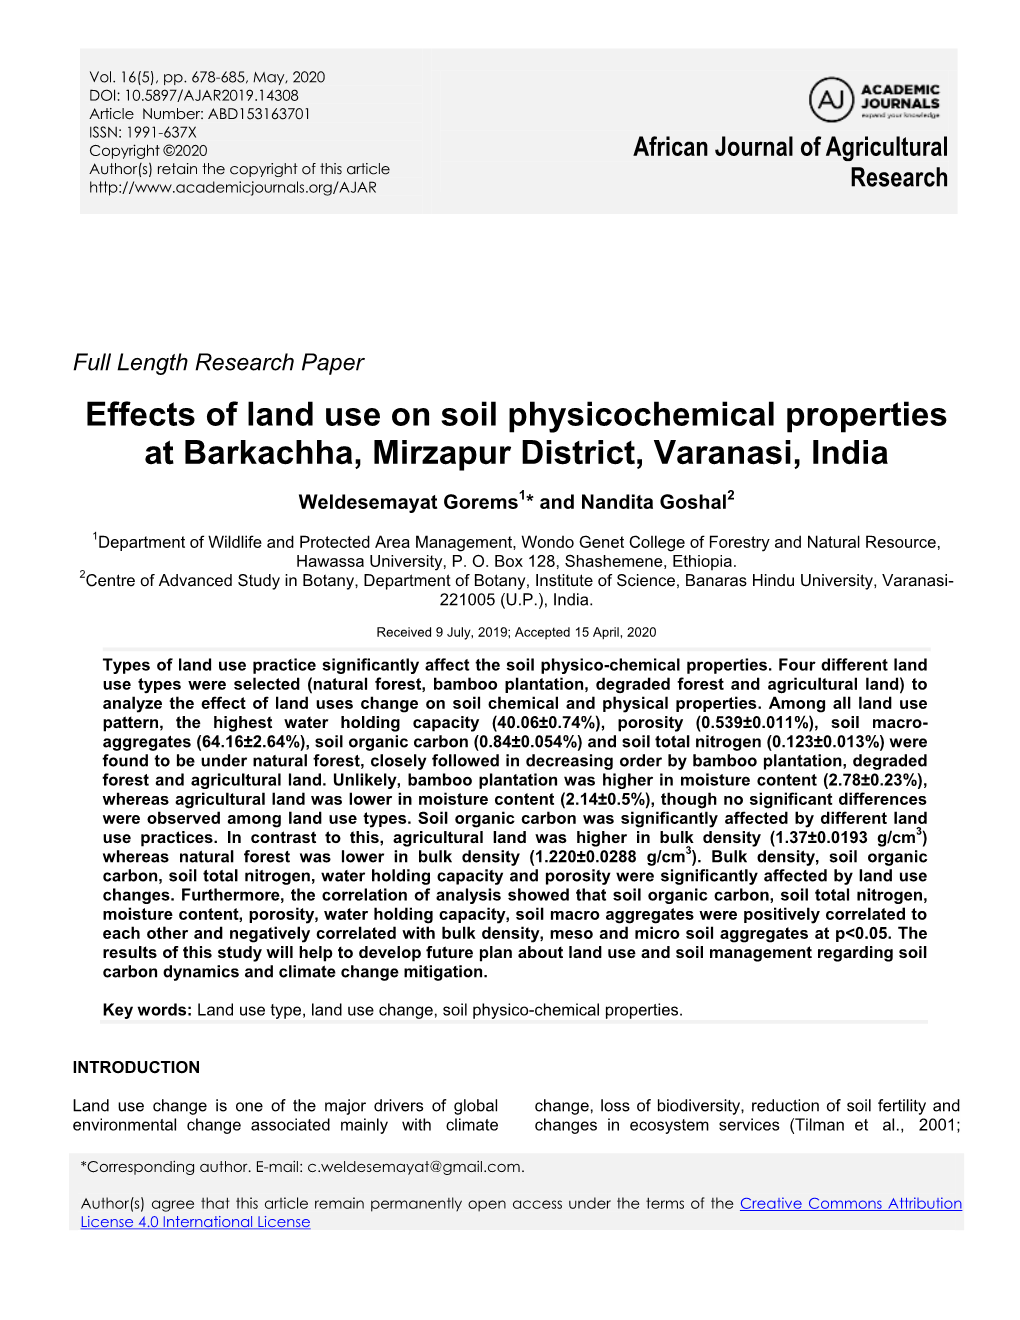 Effects of Land Use on Soil Physicochemical Properties at Barkachha, Mirzapur District, Varanasi, India